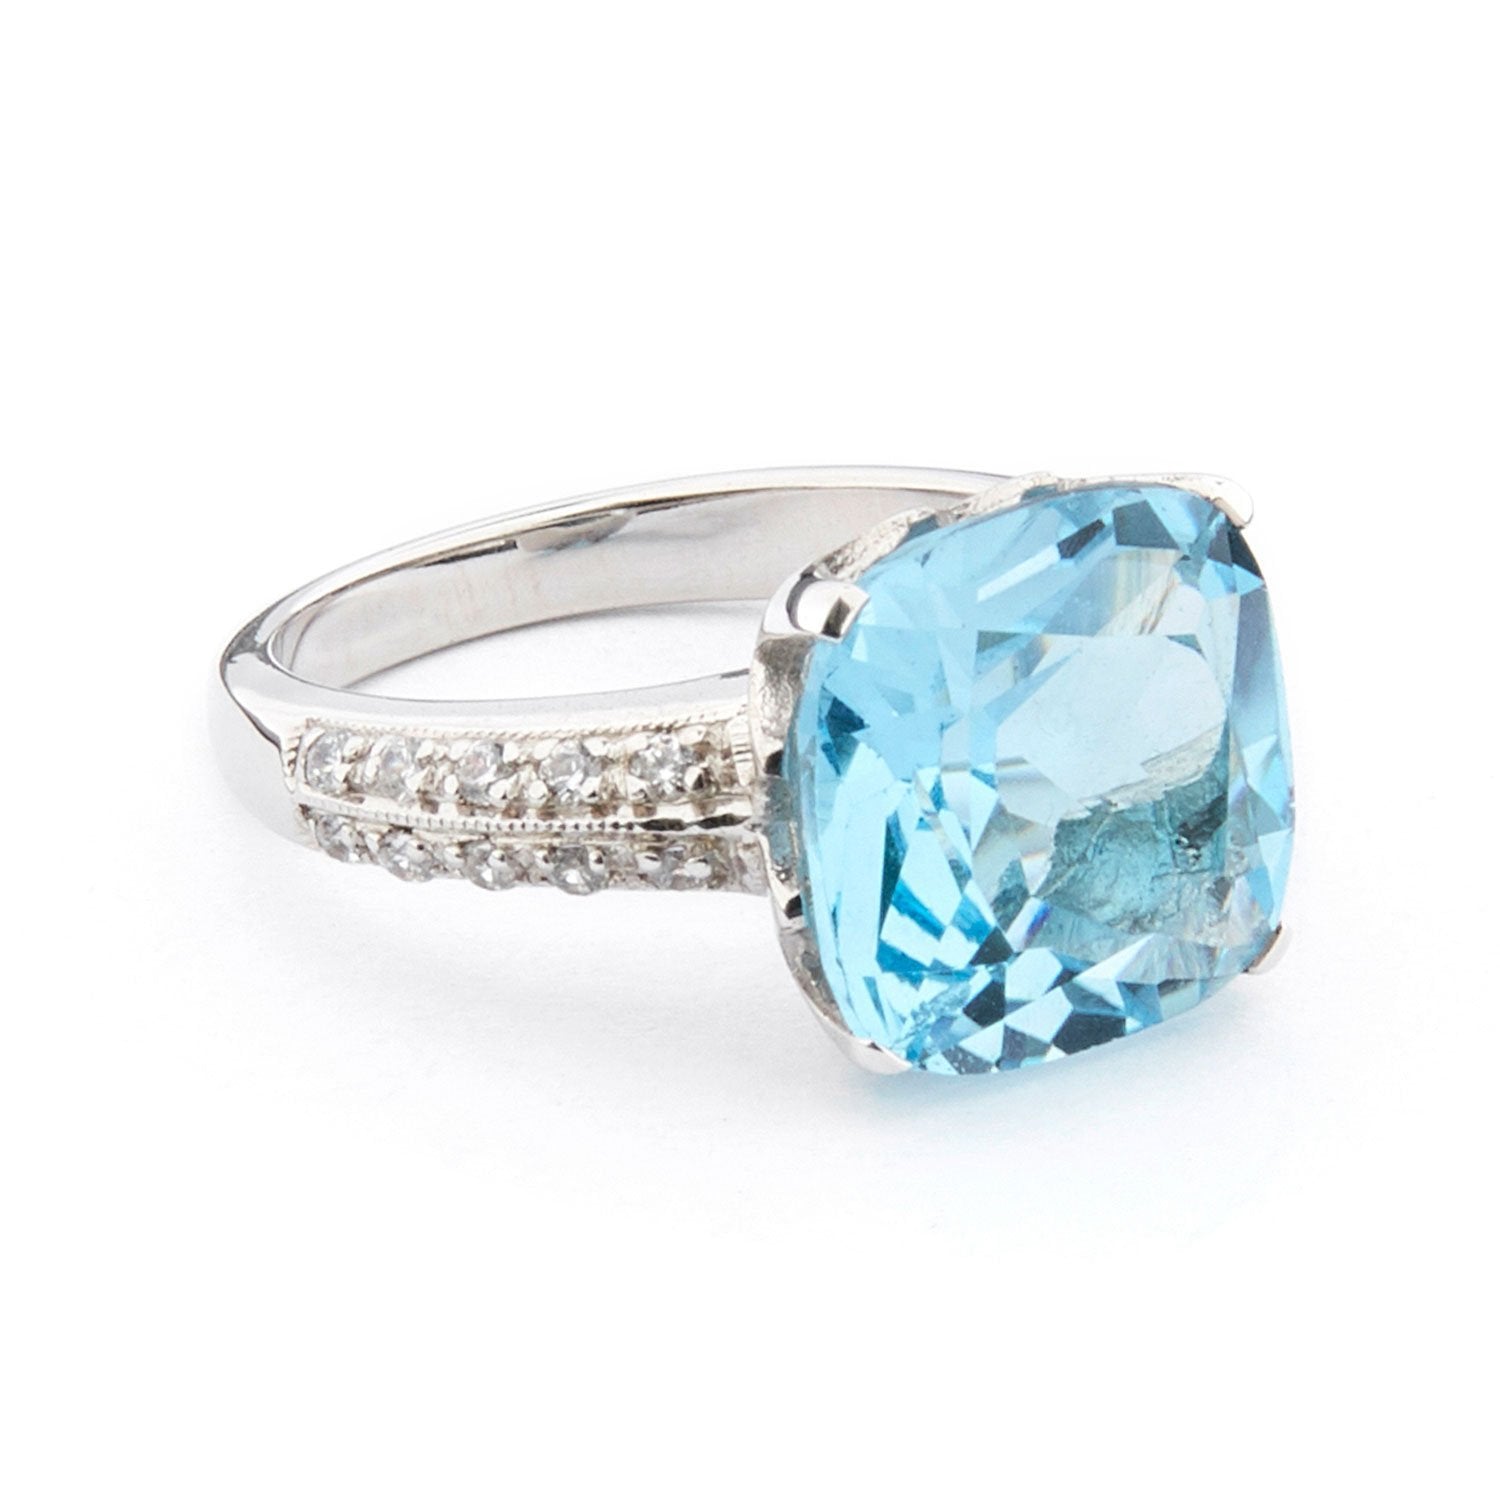 Wellington_&_North_Art_Deco_Jewellery_Rosalind_Cushion_Cut_Blue_Topaz_Cubic_Zirconia_925_Sterling_Silver_Ring_Side_View